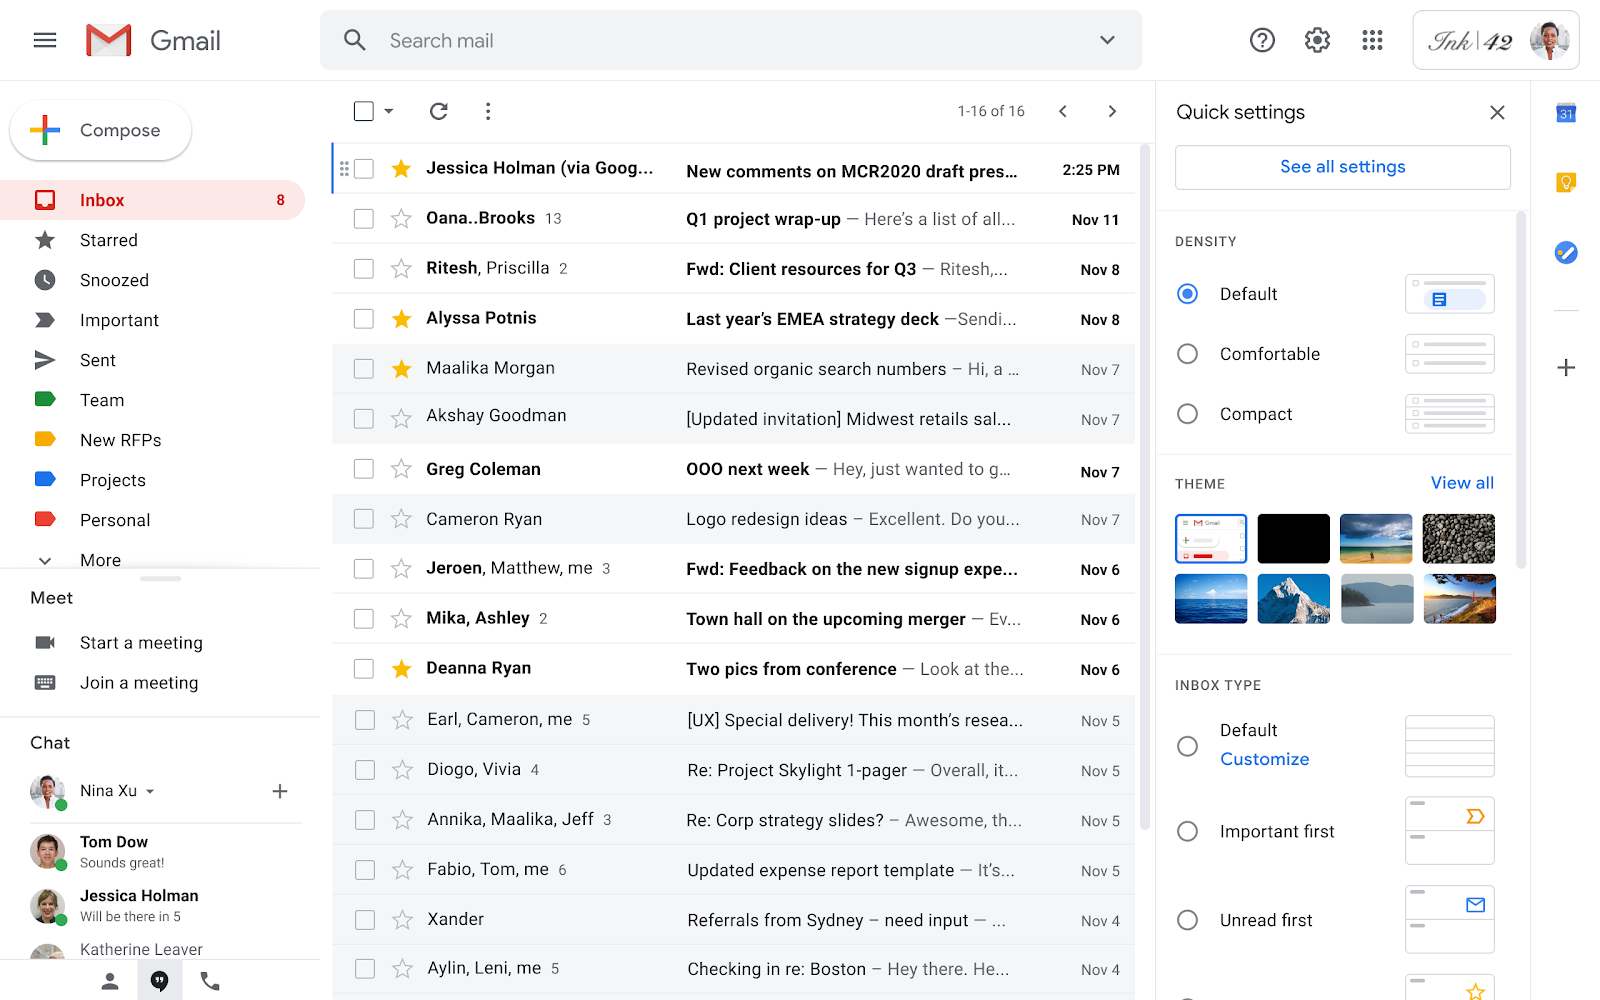 Screenshot of the Gmail inbox with the new quick layout settings menu located to the right side of the screen.